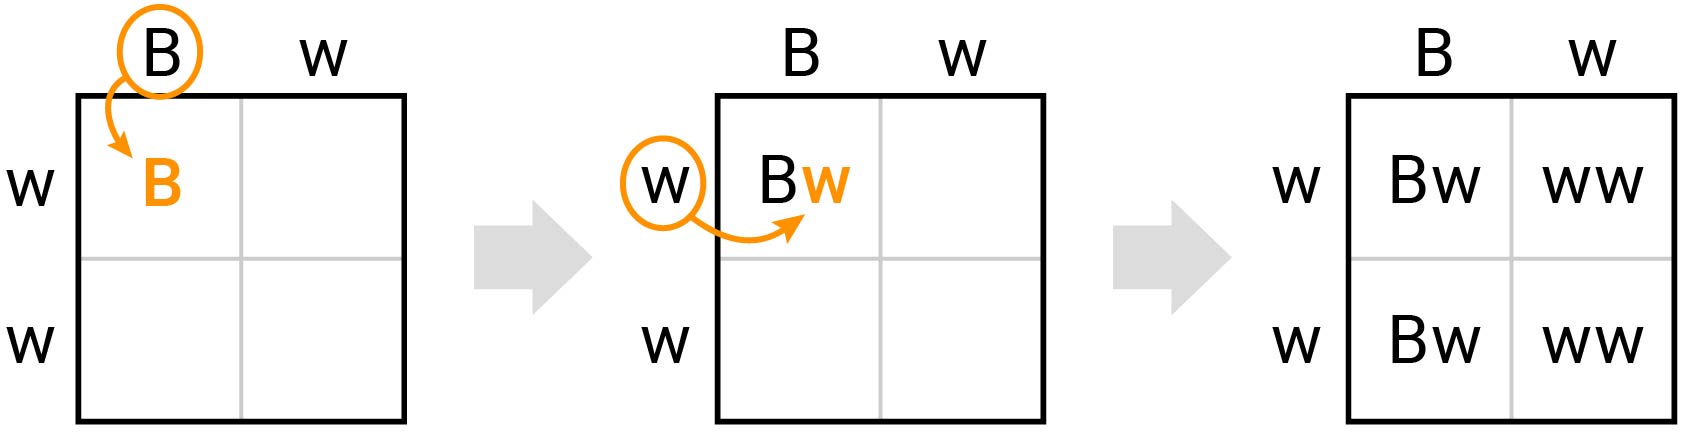 3 steps showing how to find the children's genotypes in a Punnett square. The top of the Punnett square has the parent alleles B in the first column and w in the second column. The left side of Punnett square has the parent alleles w in the first row and w in the second row. The first step shows how the B from the first parent goes into the upper left child square. The second step shows how the w from the second parent goes into the upper left child square. This makes the genotype of the first child Bw. The third step shows the rest of the children's genotypes complete. The upper right child is ww. The lower left child is Bw. The lower right child is ww.